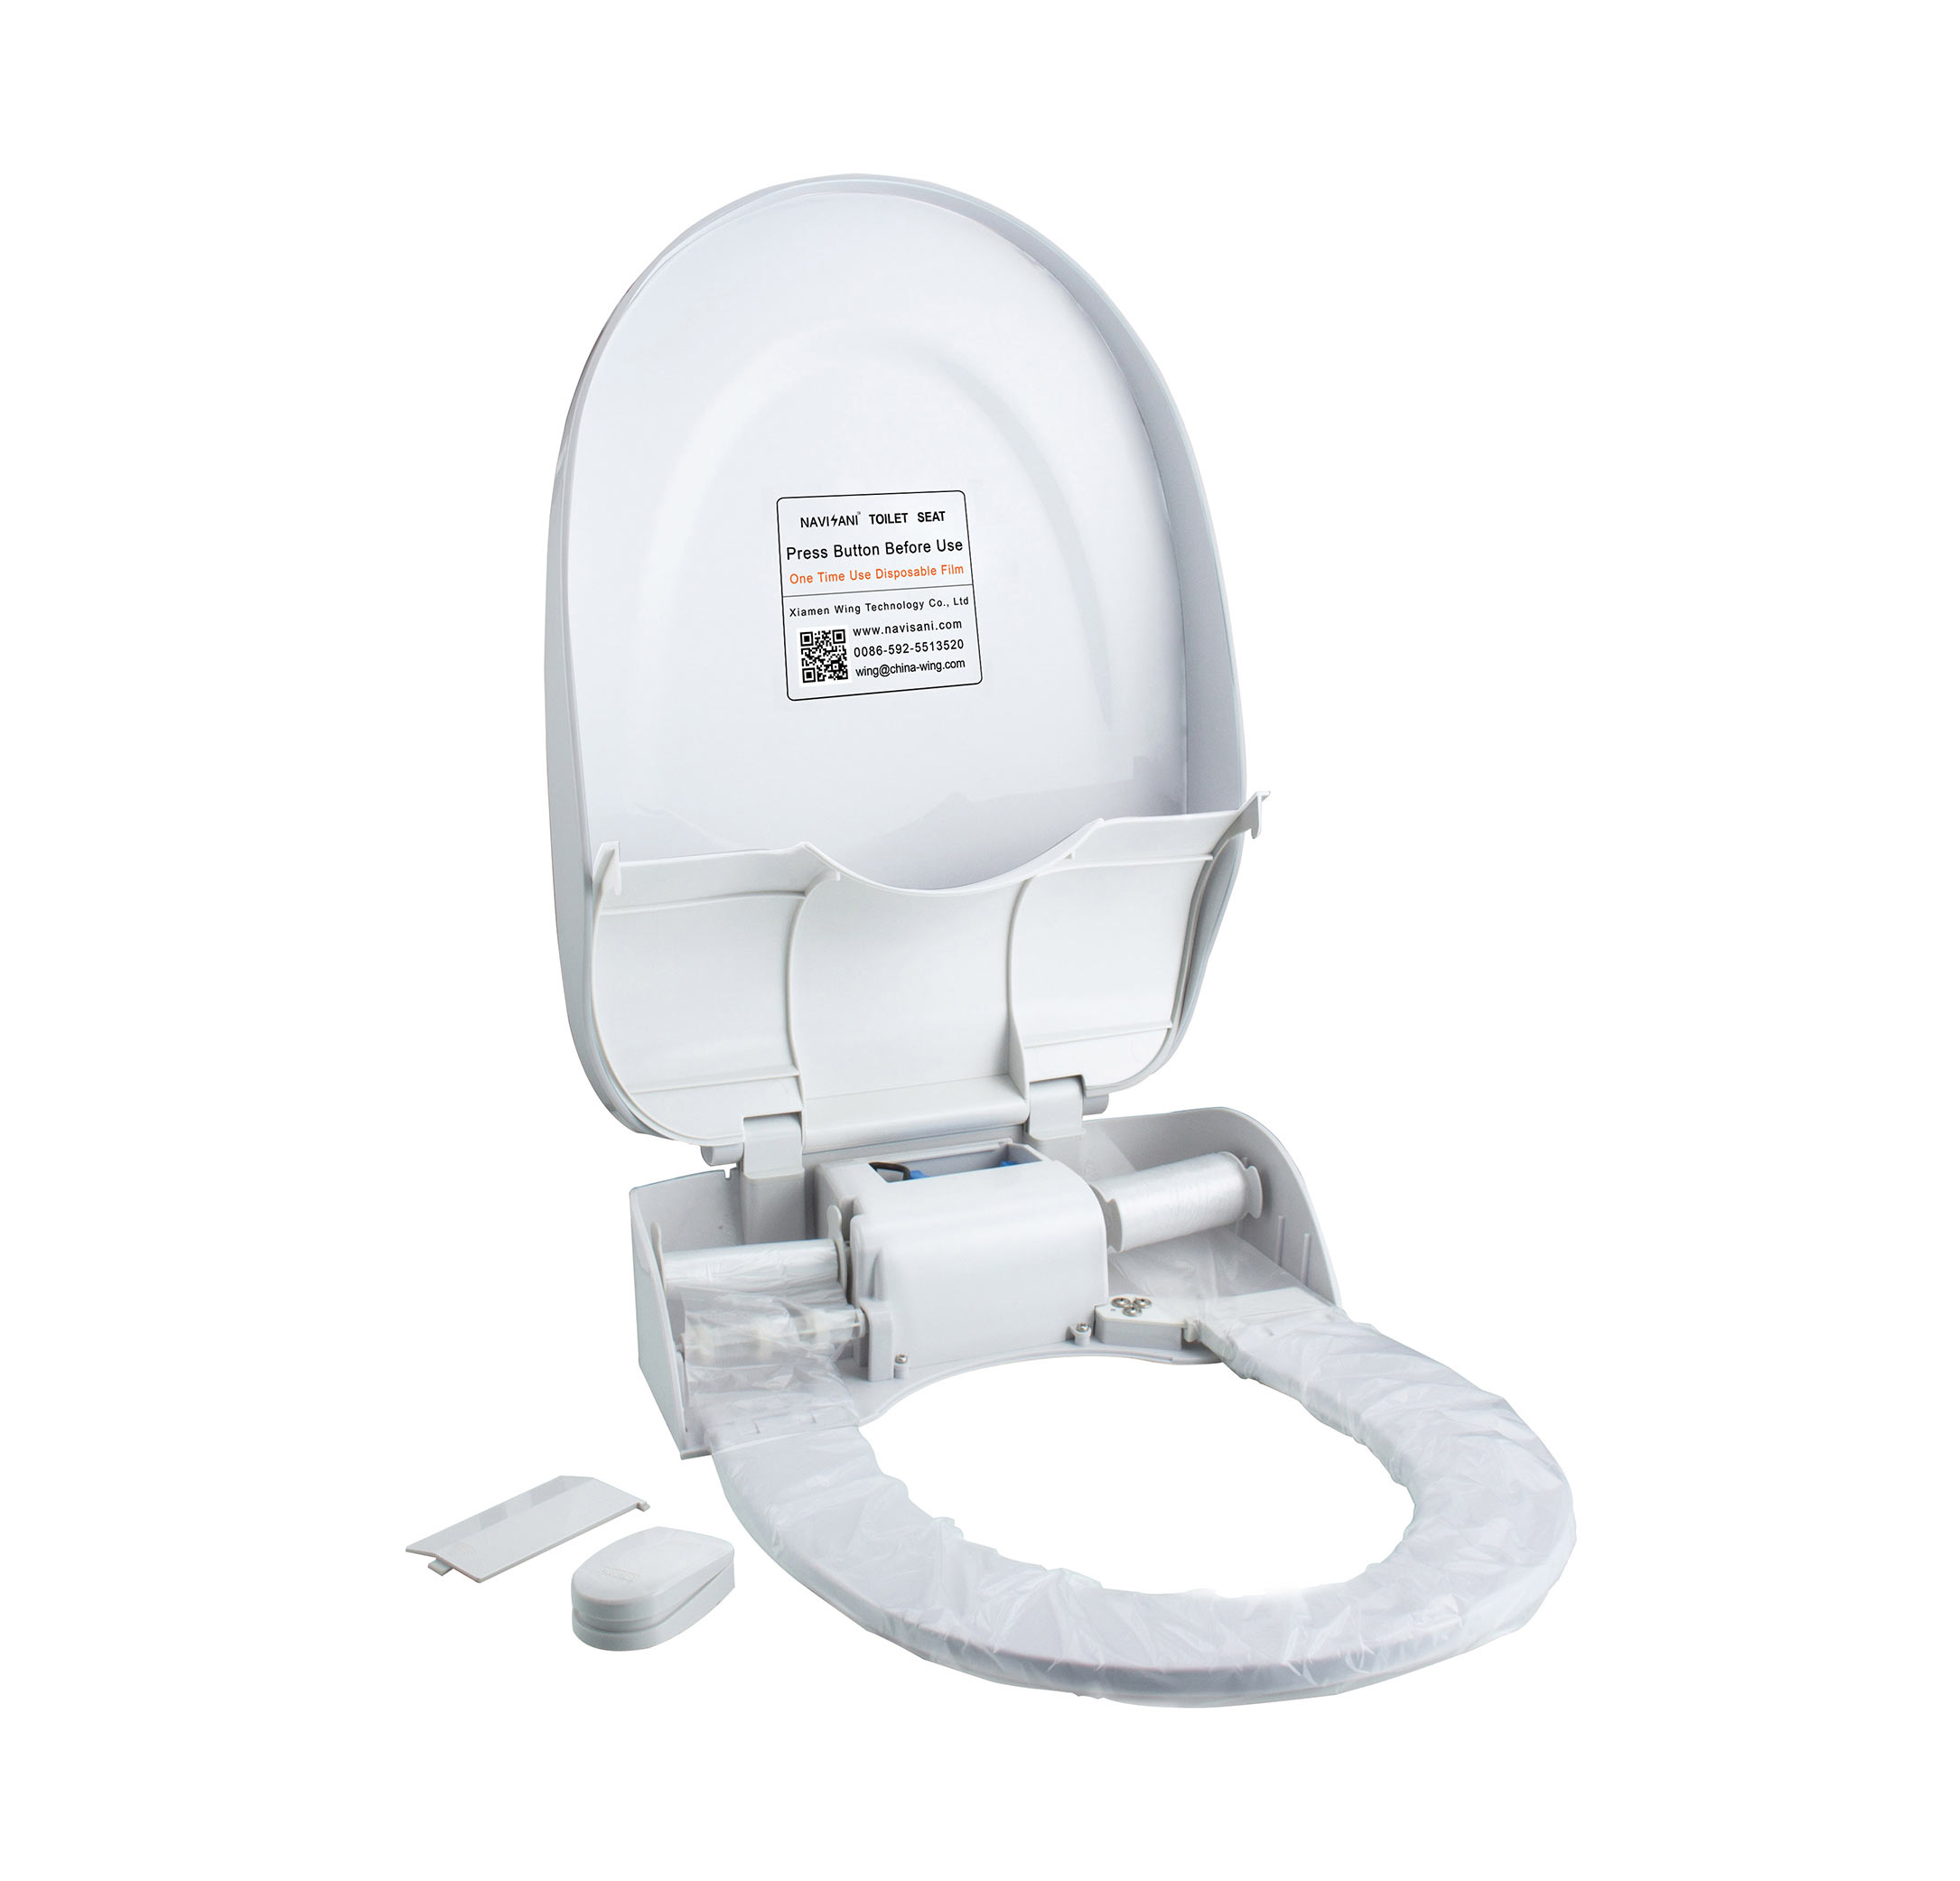 Self Cleaning Bathroom Automatic Toilet Seat Covers